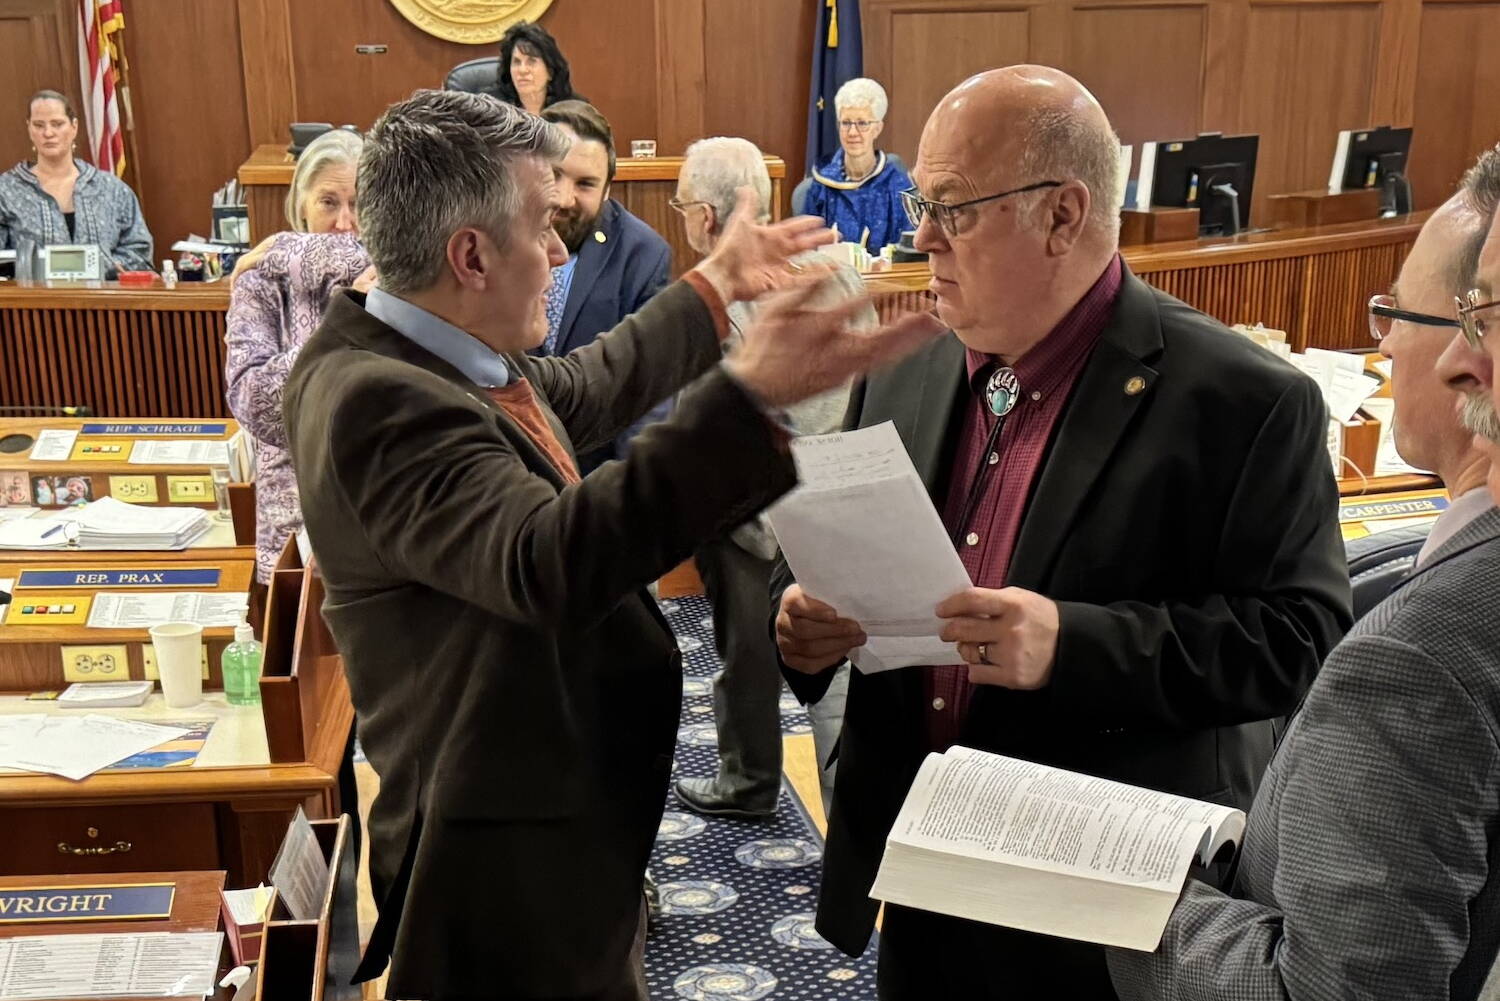 Rep. Andrew Gray, D-Anchorage, gestures with his hands as he talks to Rep. Kevin McCabe, R-Big Lake, about an amendment to raise the state’s age of consent on Friday in the Alaska House of Representatives. (Photo by James Brooks/Alaska Beacon)